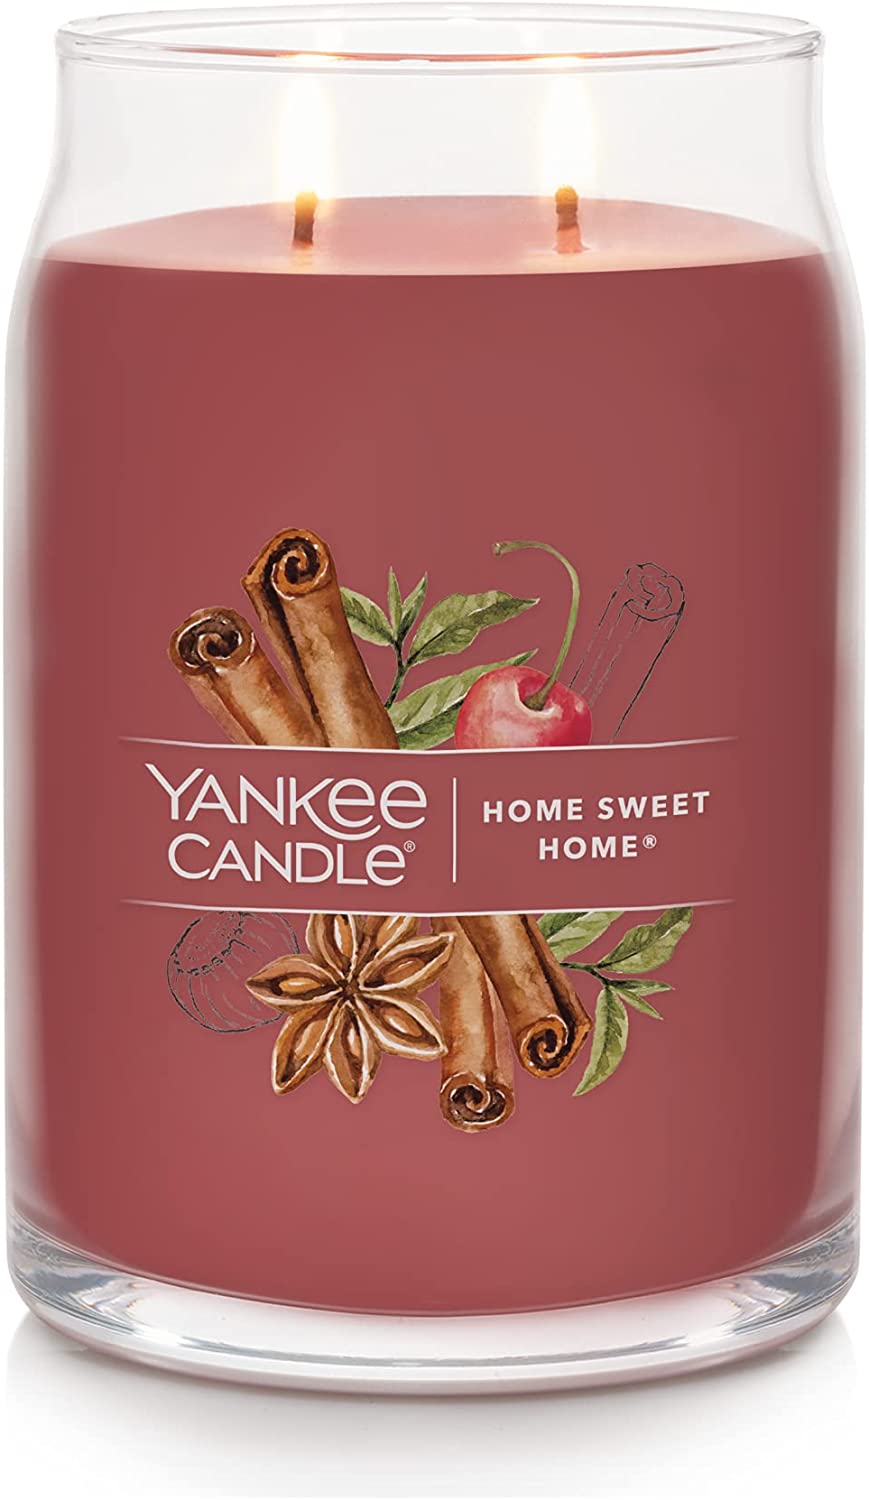 Yankee Candle 1630683 Home Sweet Home Signature Large Jar Candle - image 4 of 5